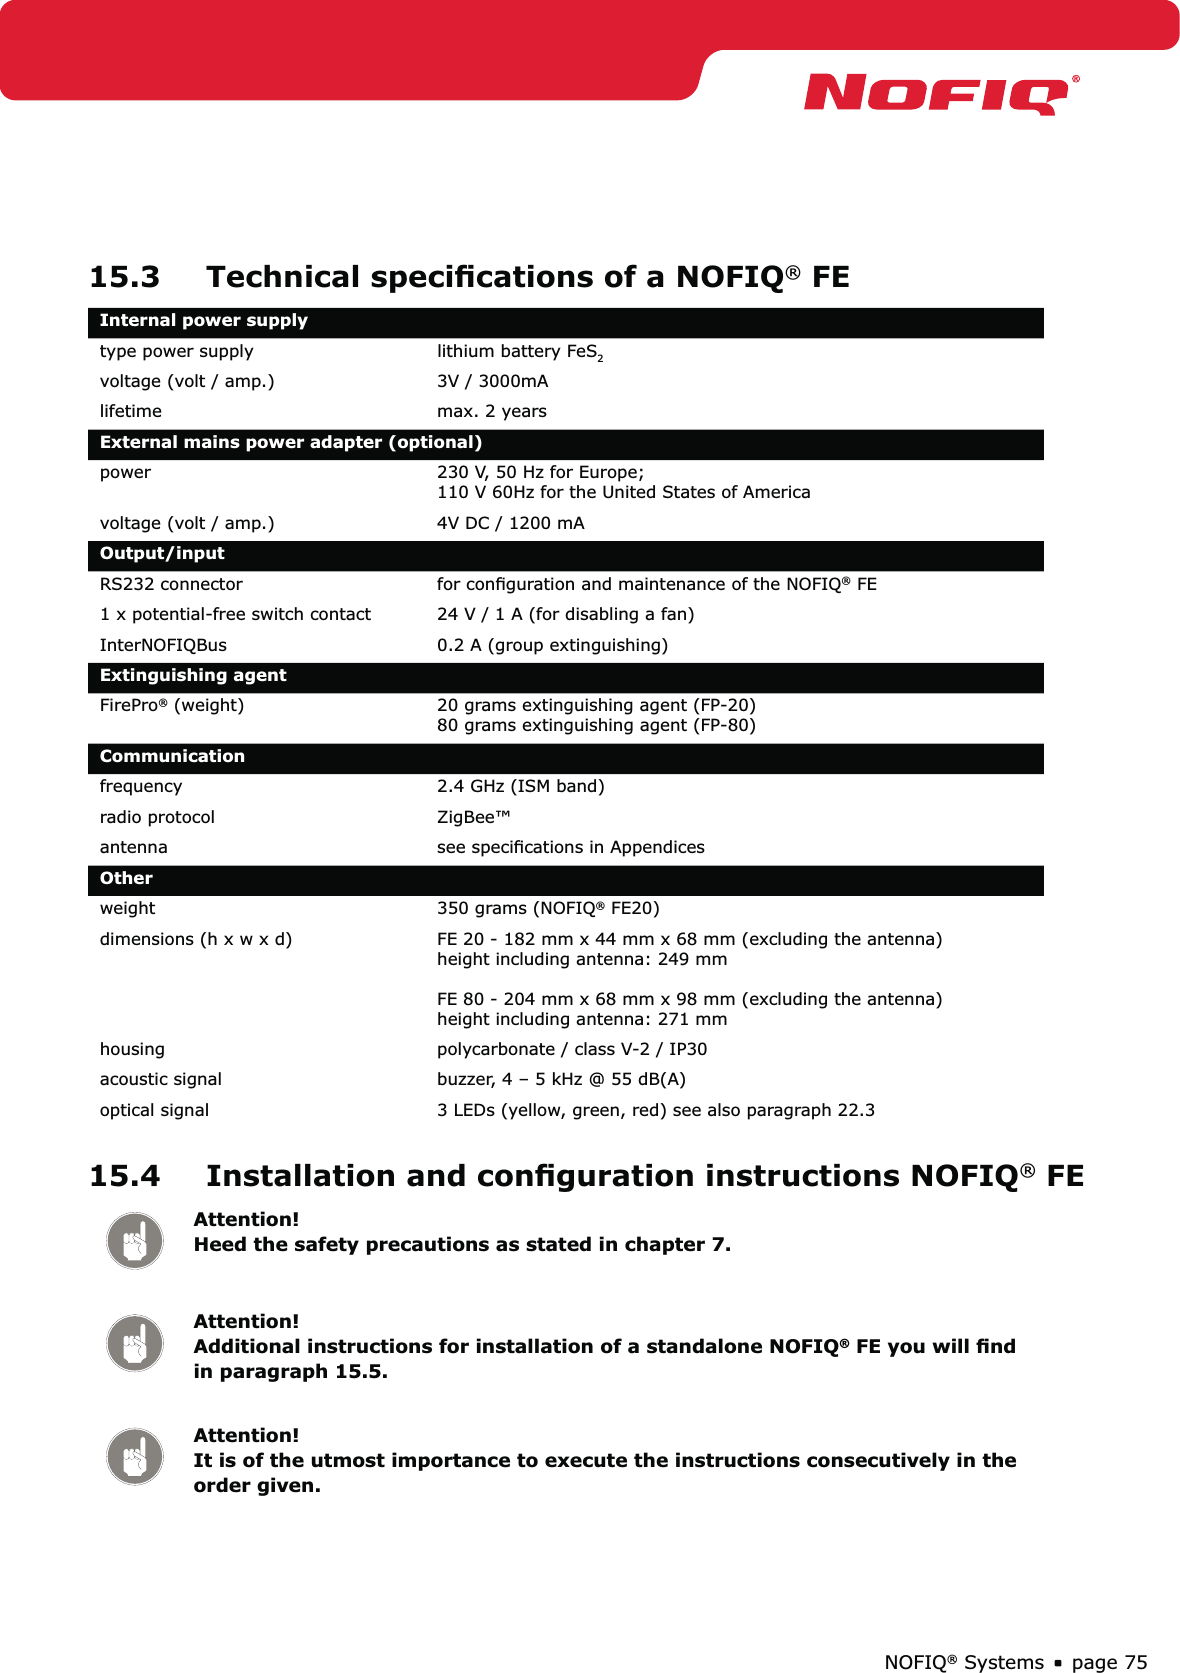 page 75NOFIQ® Systems15.3  Technical speciﬁcations of a NOFIQ® FEInternal power supplytype power supply  lithium battery FeS2voltage (volt / amp.) 3V / 3000mAlifetime  max. 2 yearsExternal mains power adapter (optional)power 230 V, 50 Hz for Europe;  110 V 60Hz for the United States of Americavoltage (volt / amp.) 4V DC / 1200 mAOutput/inputRS232 connector for conﬁguration and maintenance of the NOFIQ® FE1 x potential-free switch contact 24 V / 1 A (for disabling a fan)InterNOFIQBus 0.2 A (group extinguishing)Extinguishing agent FirePro® (weight) 20 grams extinguishing agent (FP-20) 80 grams extinguishing agent (FP-80)Communicationfrequency 2.4 GHz (ISM band)radio protocol ZigBee™antenna see speciﬁcations in AppendicesOther weight 350 grams (NOFIQ® FE20)dimensions (h x w x d) FE 20 - 182 mm x 44 mm x 68 mm (excluding the antenna) height including antenna: 249 mm  FE 80 - 204 mm x 68 mm x 98 mm (excluding the antenna) height including antenna: 271 mmhousing  polycarbonate / class V-2 / IP30acoustic signal buzzer, 4 – 5 kHz @ 55 dB(A)optical signal 3 LEDs (yellow, green, red) see also paragraph 22.315.4  Installation and conﬁguration instructions NOFIQ® FEAttention! Heed the safety precautions as stated in chapter 7.Attention! Additional instructions for installation of a standalone NOFIQ® FE you will ﬁnd in paragraph 15.5.Attention! It is of the utmost importance to execute the instructions consecutively in the order given.